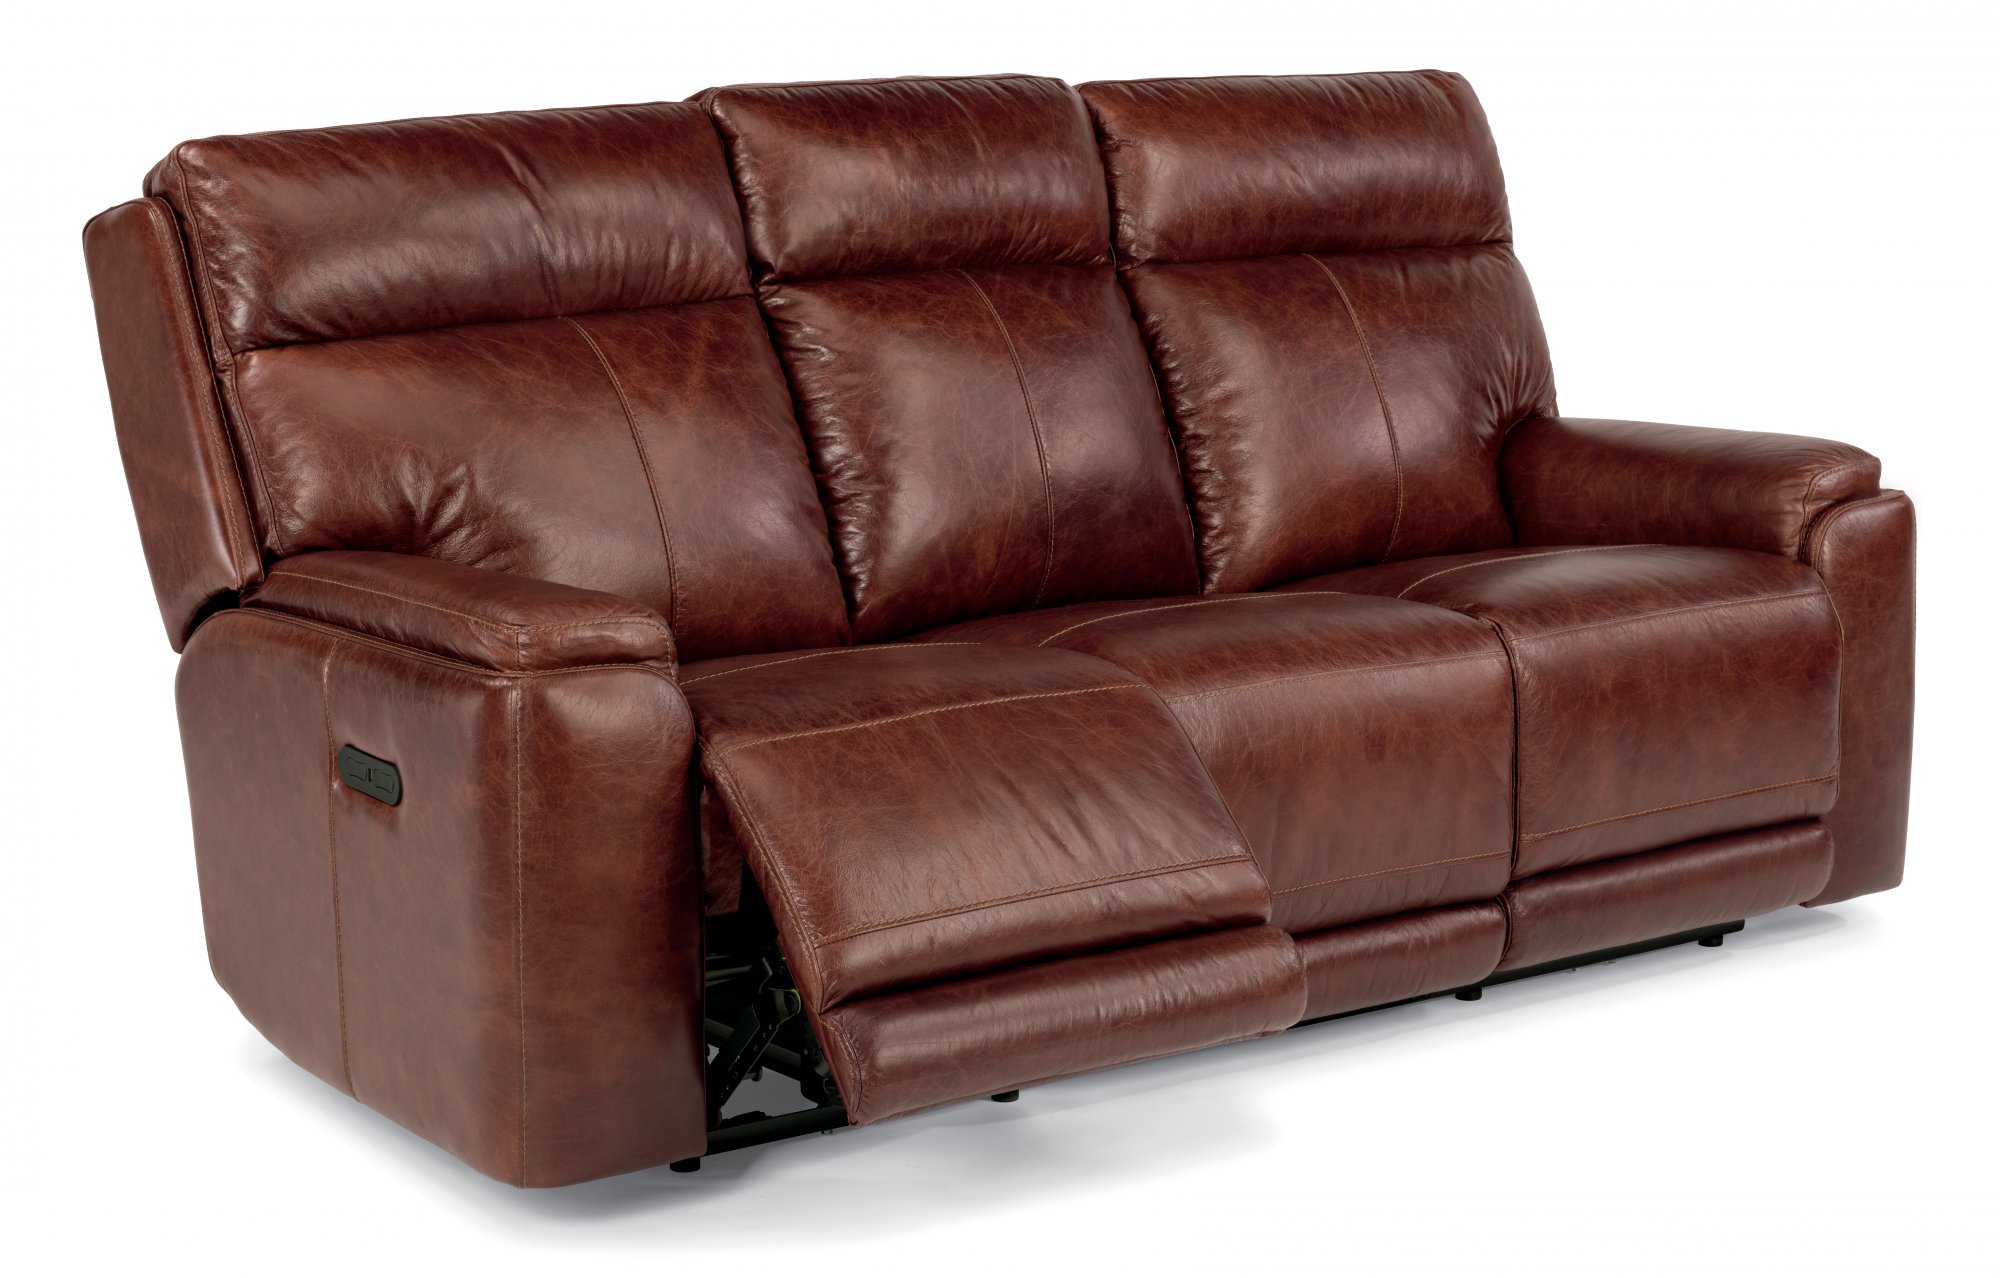 Amazing Leather Power Reclining Sofa with Power Headrests reclining leather sofa